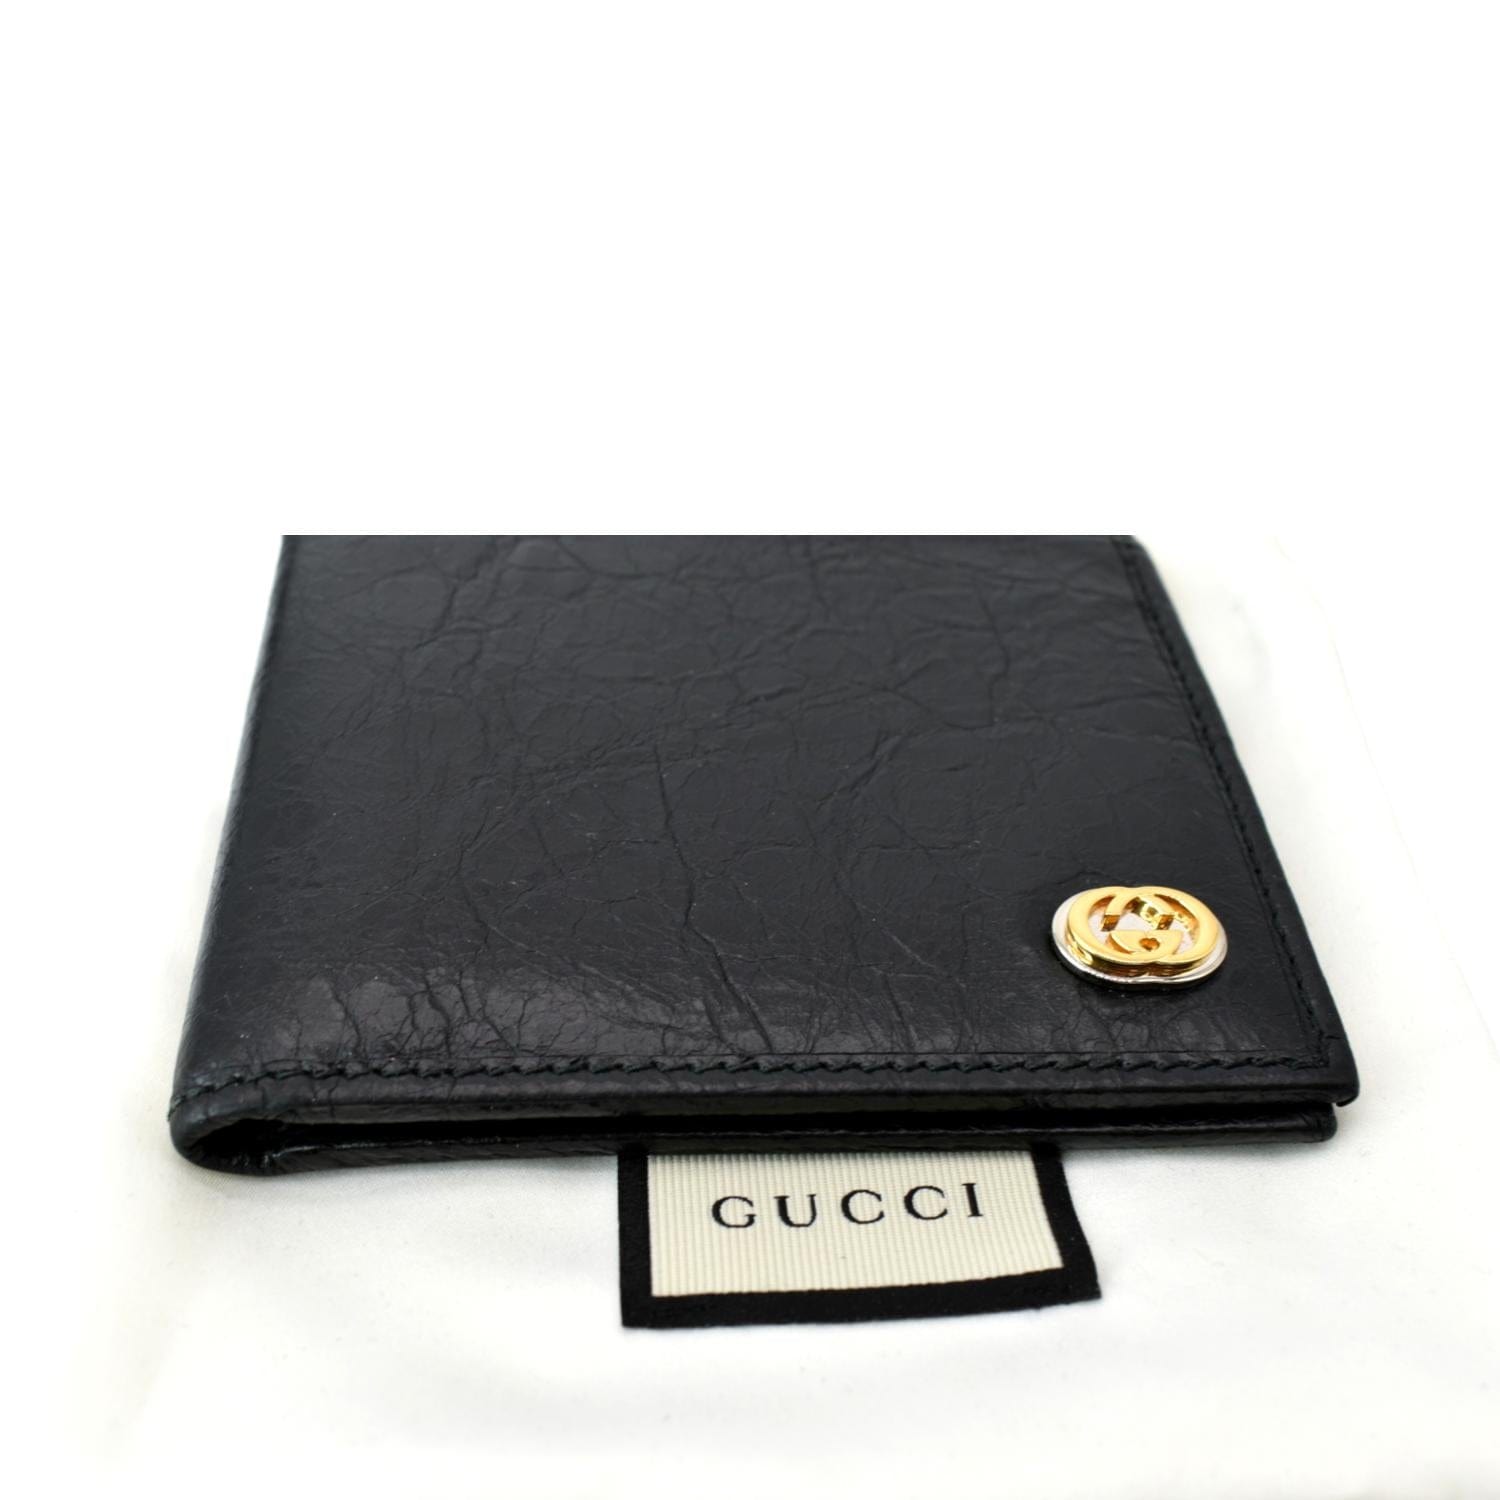  Distinctive Goods DG Monogram Black Full-Grain Leather Checkbook  Wallet Bifold - Slick Leather Wallet Idea for Travel and Keeping Organized  on The Go : Office Products